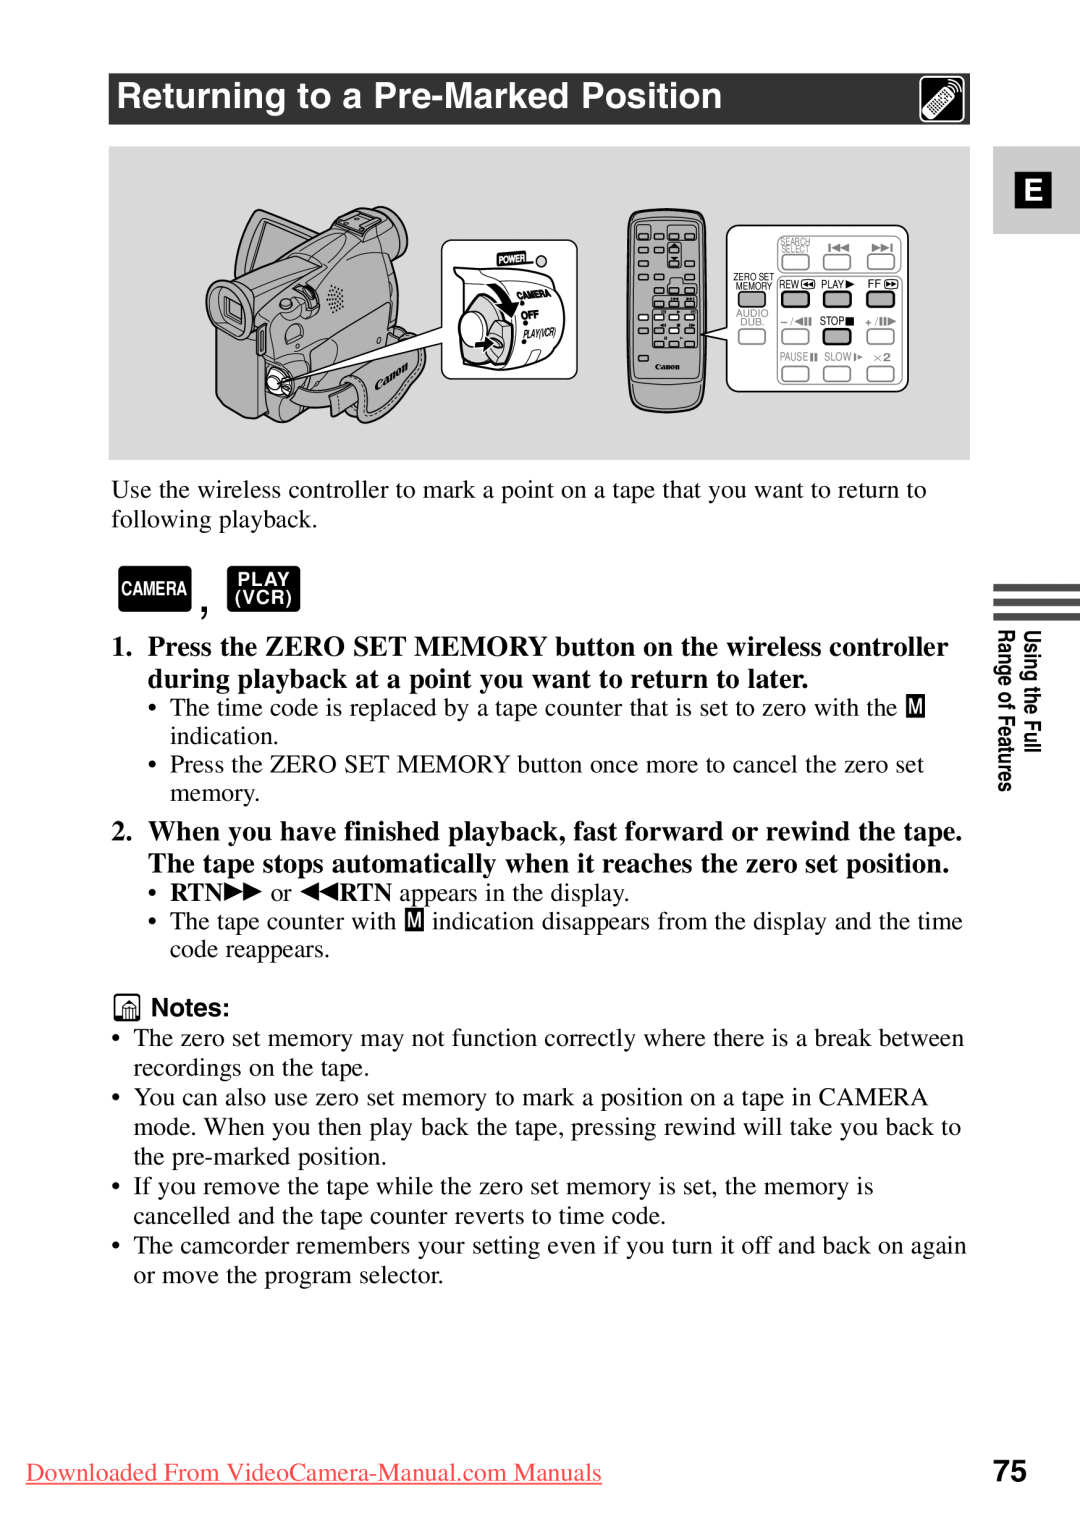 Canon 7561A001, MV500i instruction manual Returning to a Pre-Marked Position, Downloaded From VideoCamera-Manual.com Manuals 